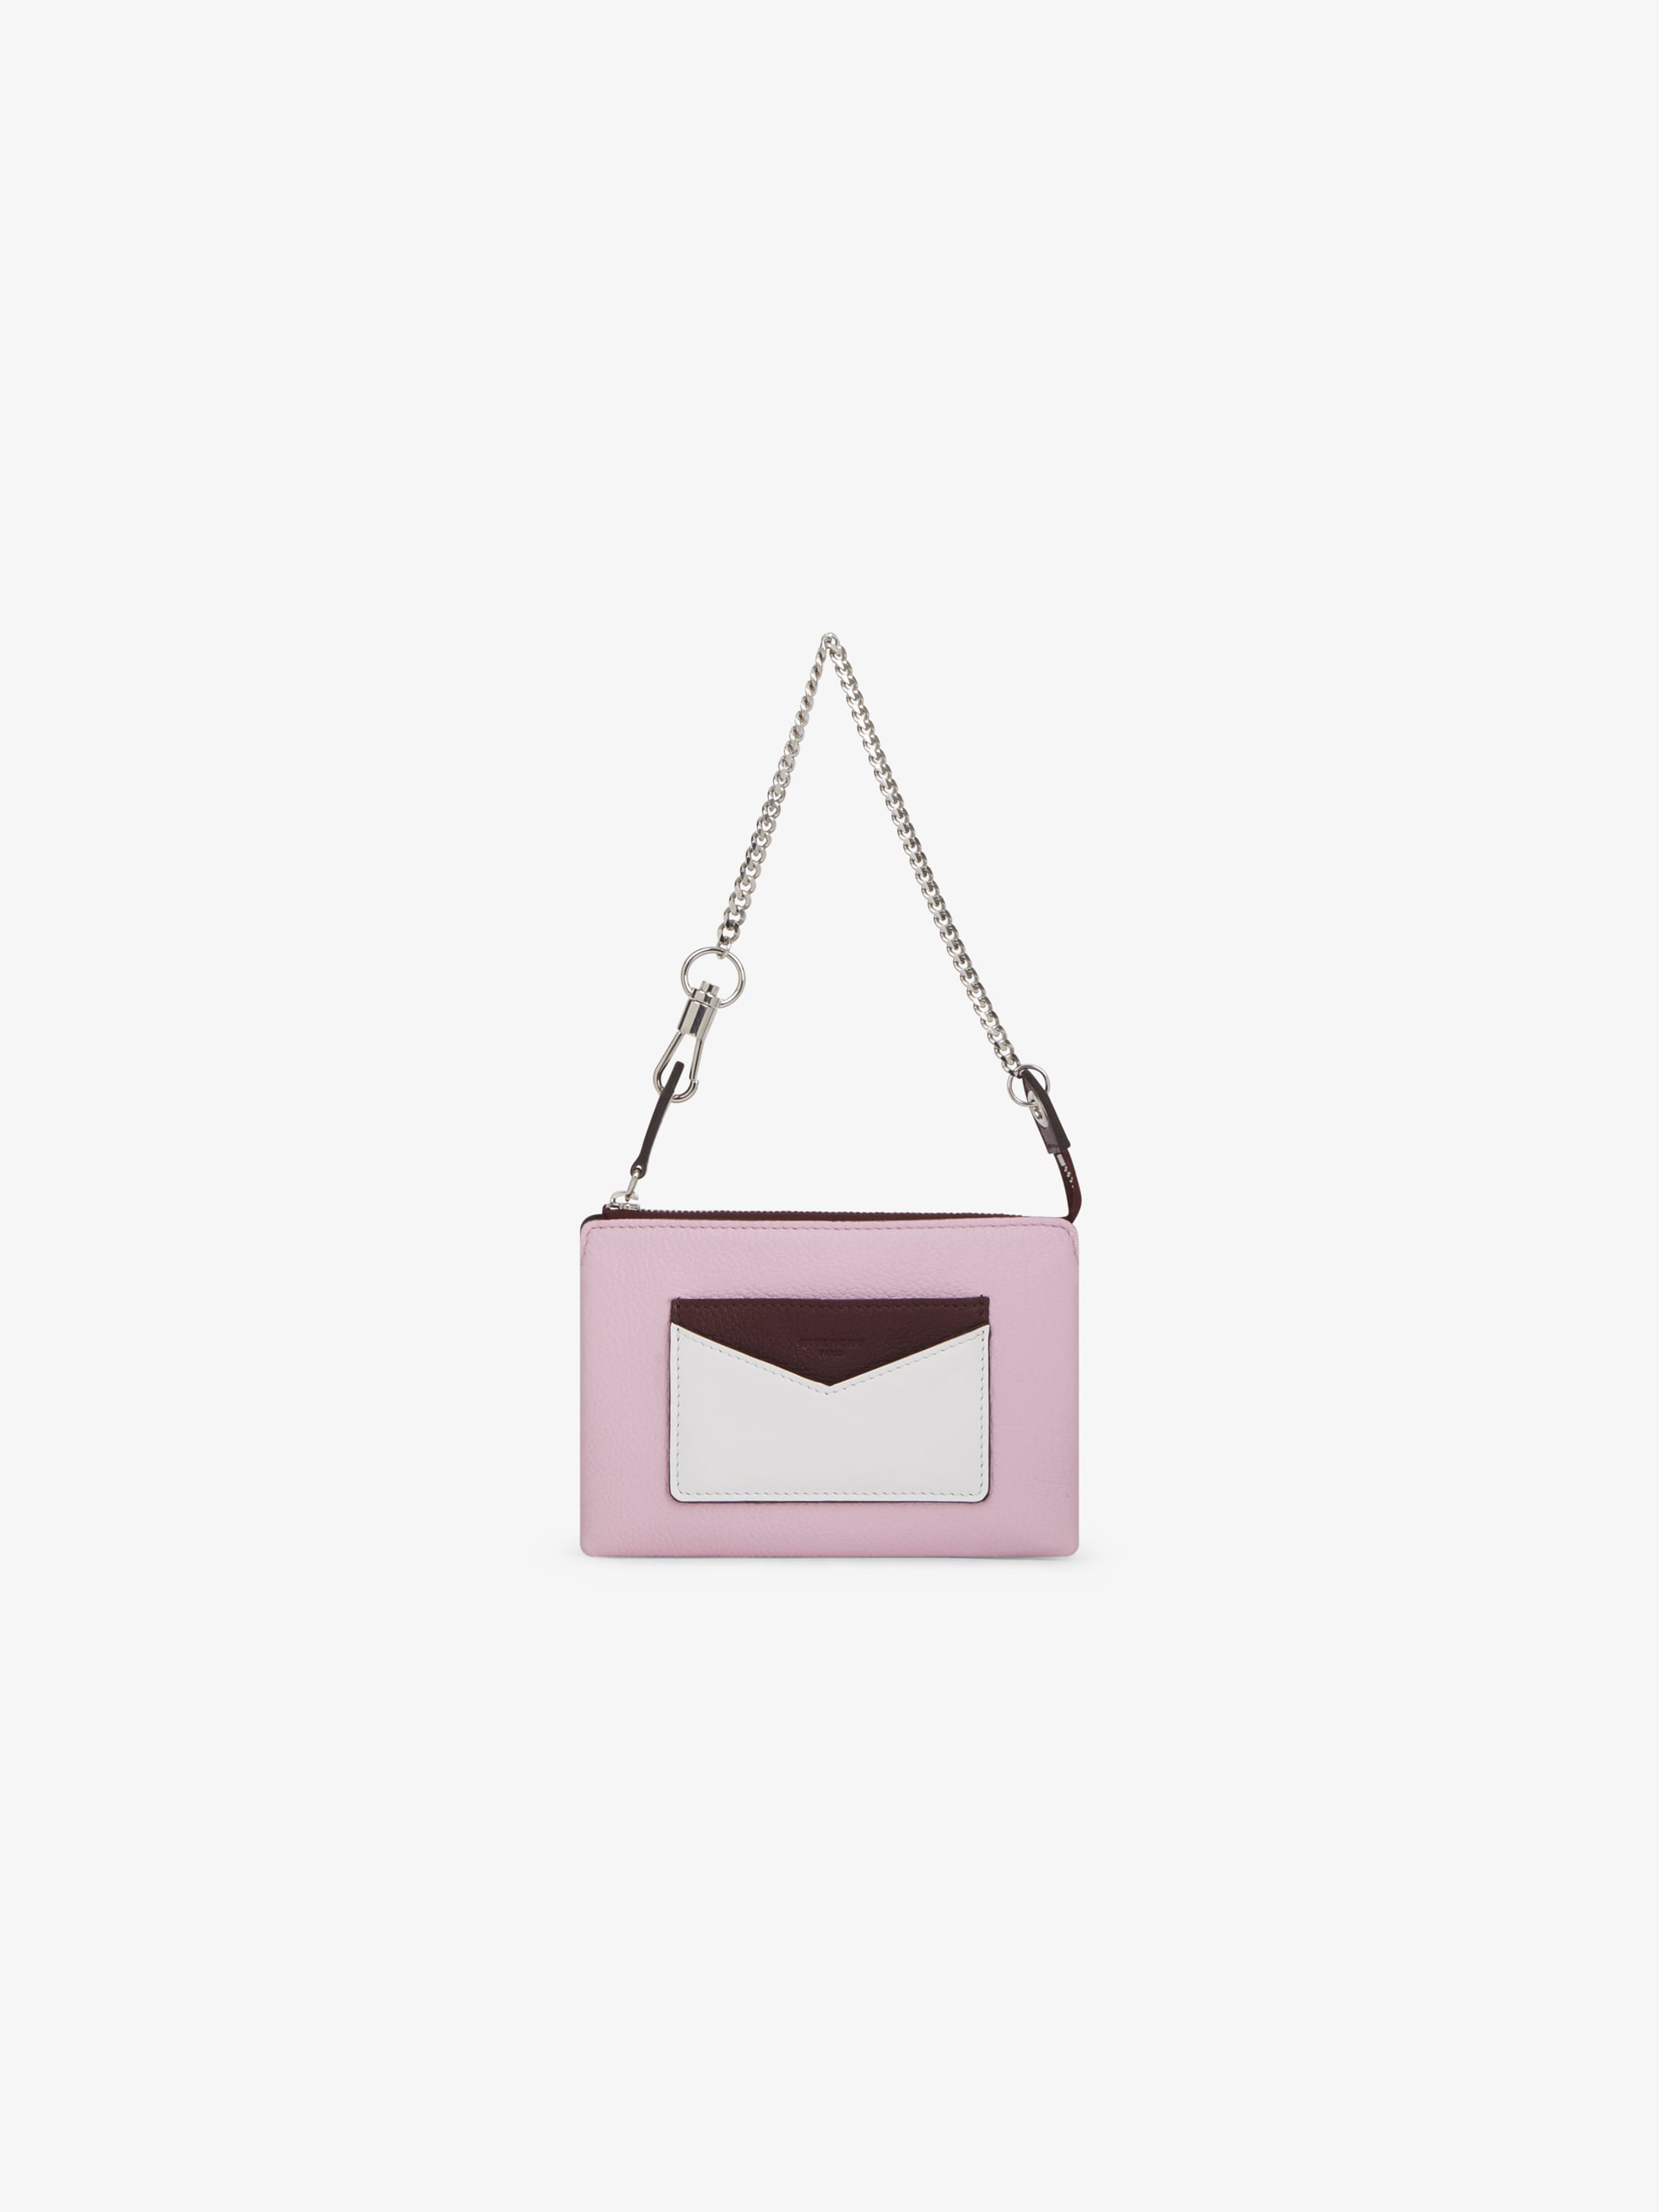 Givenchy Duetto pouch | GIVENCHY Paris